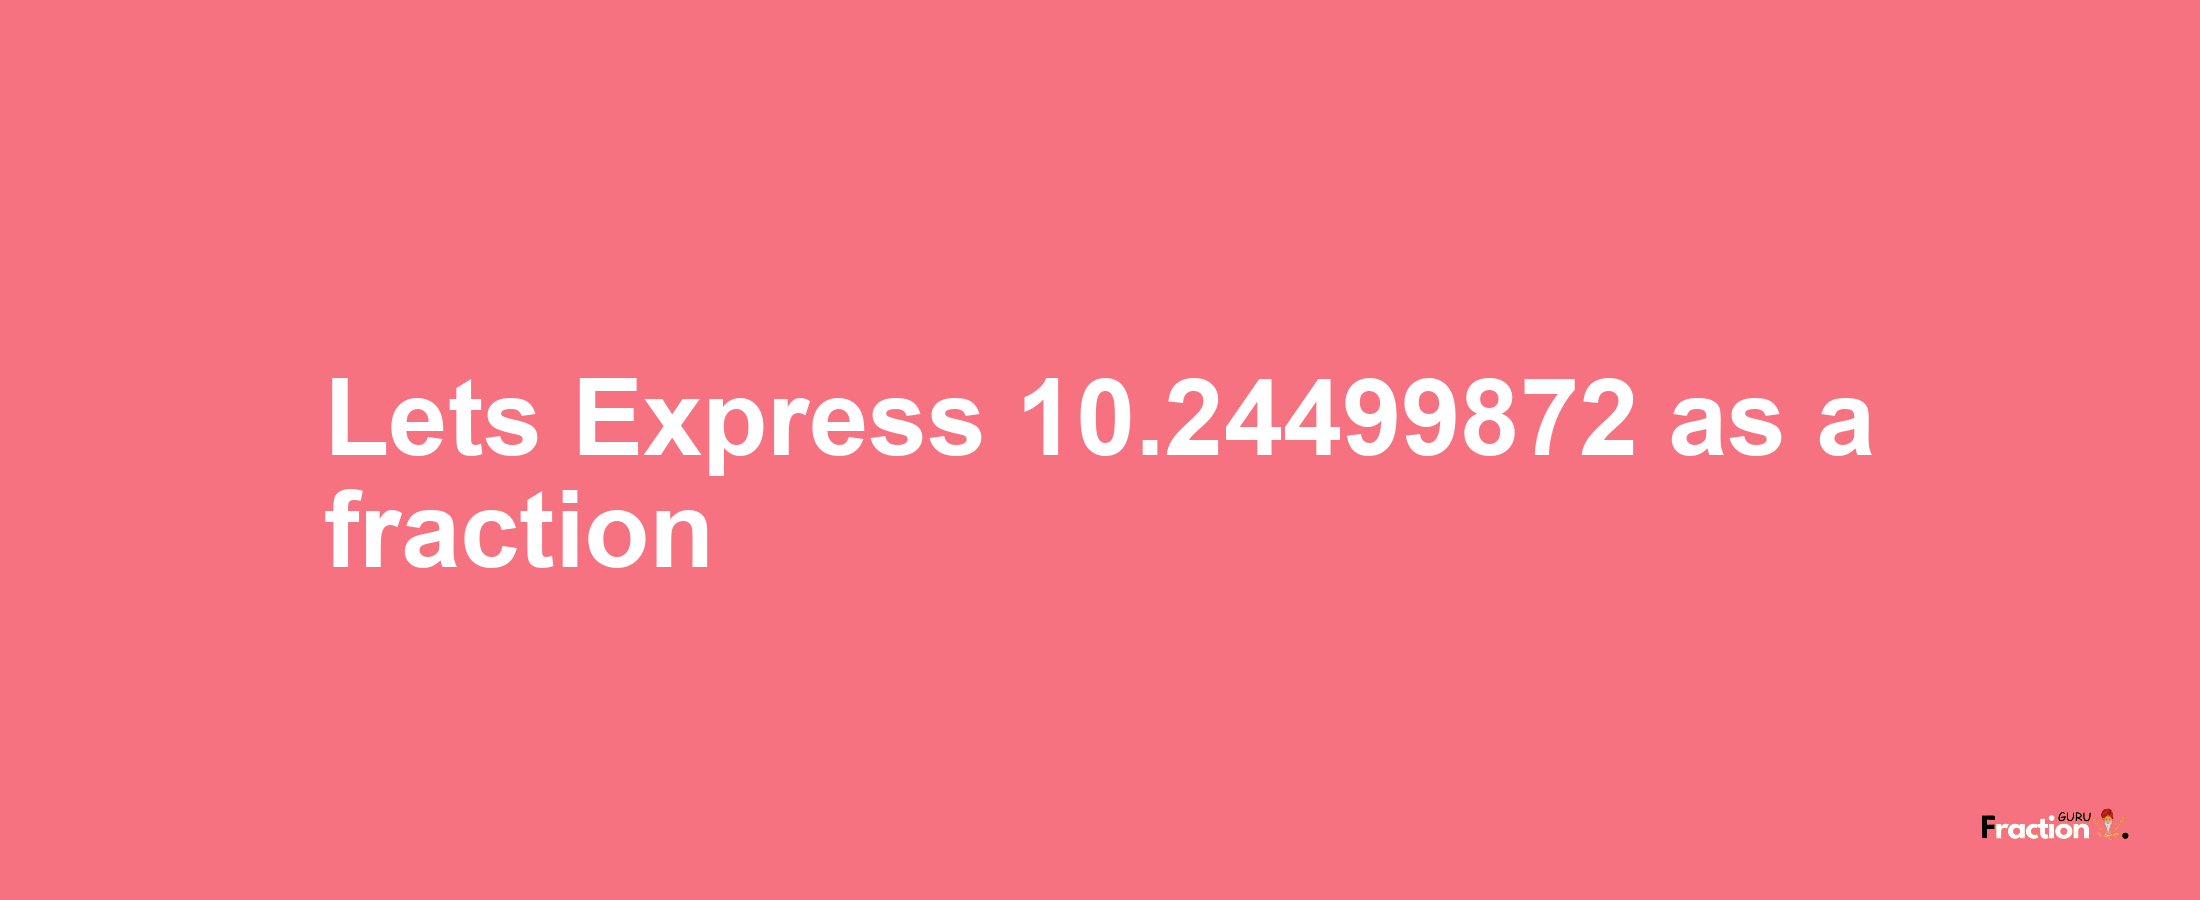 Lets Express 10.24499872 as afraction